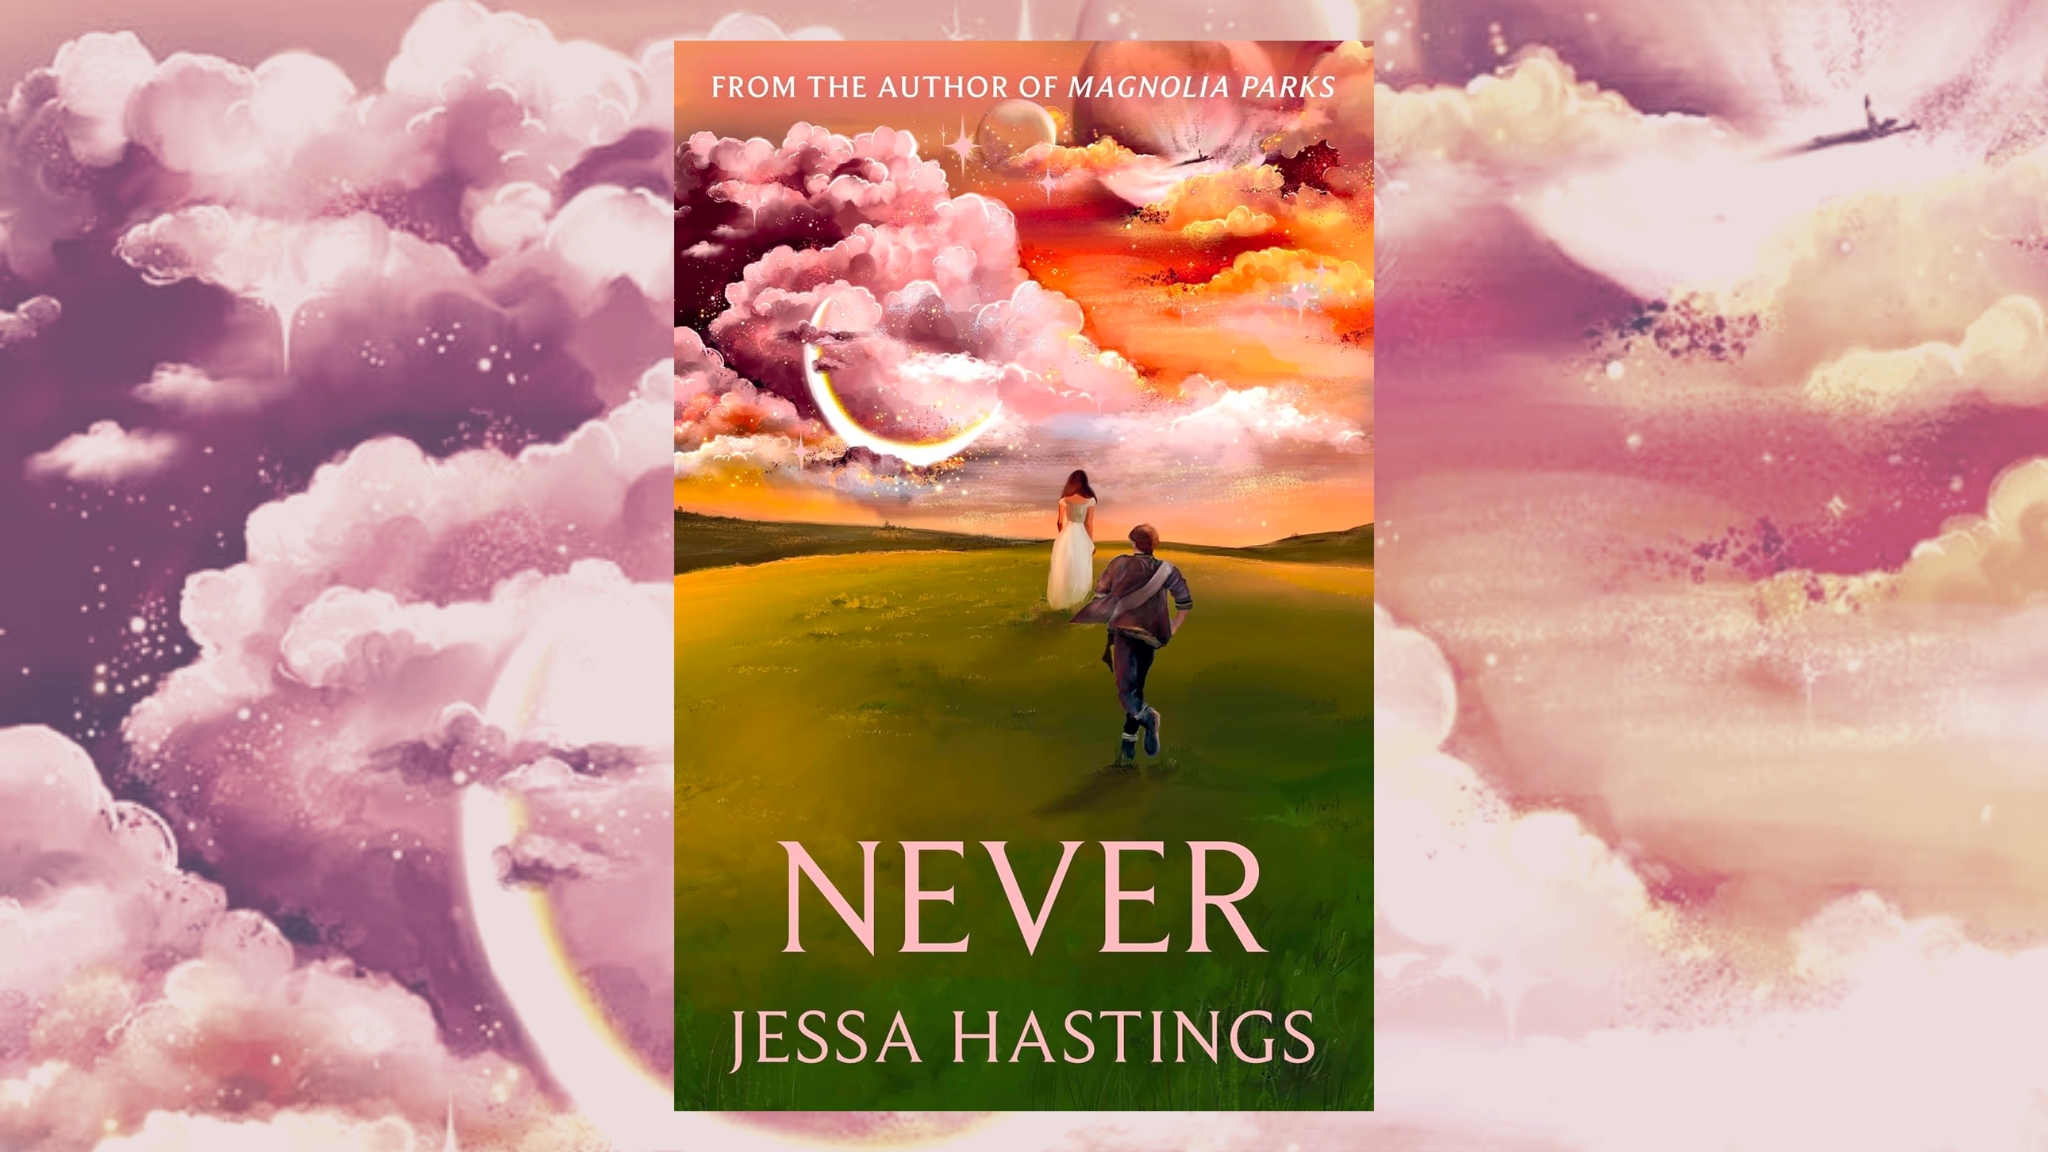 Never by Jessa Hastings